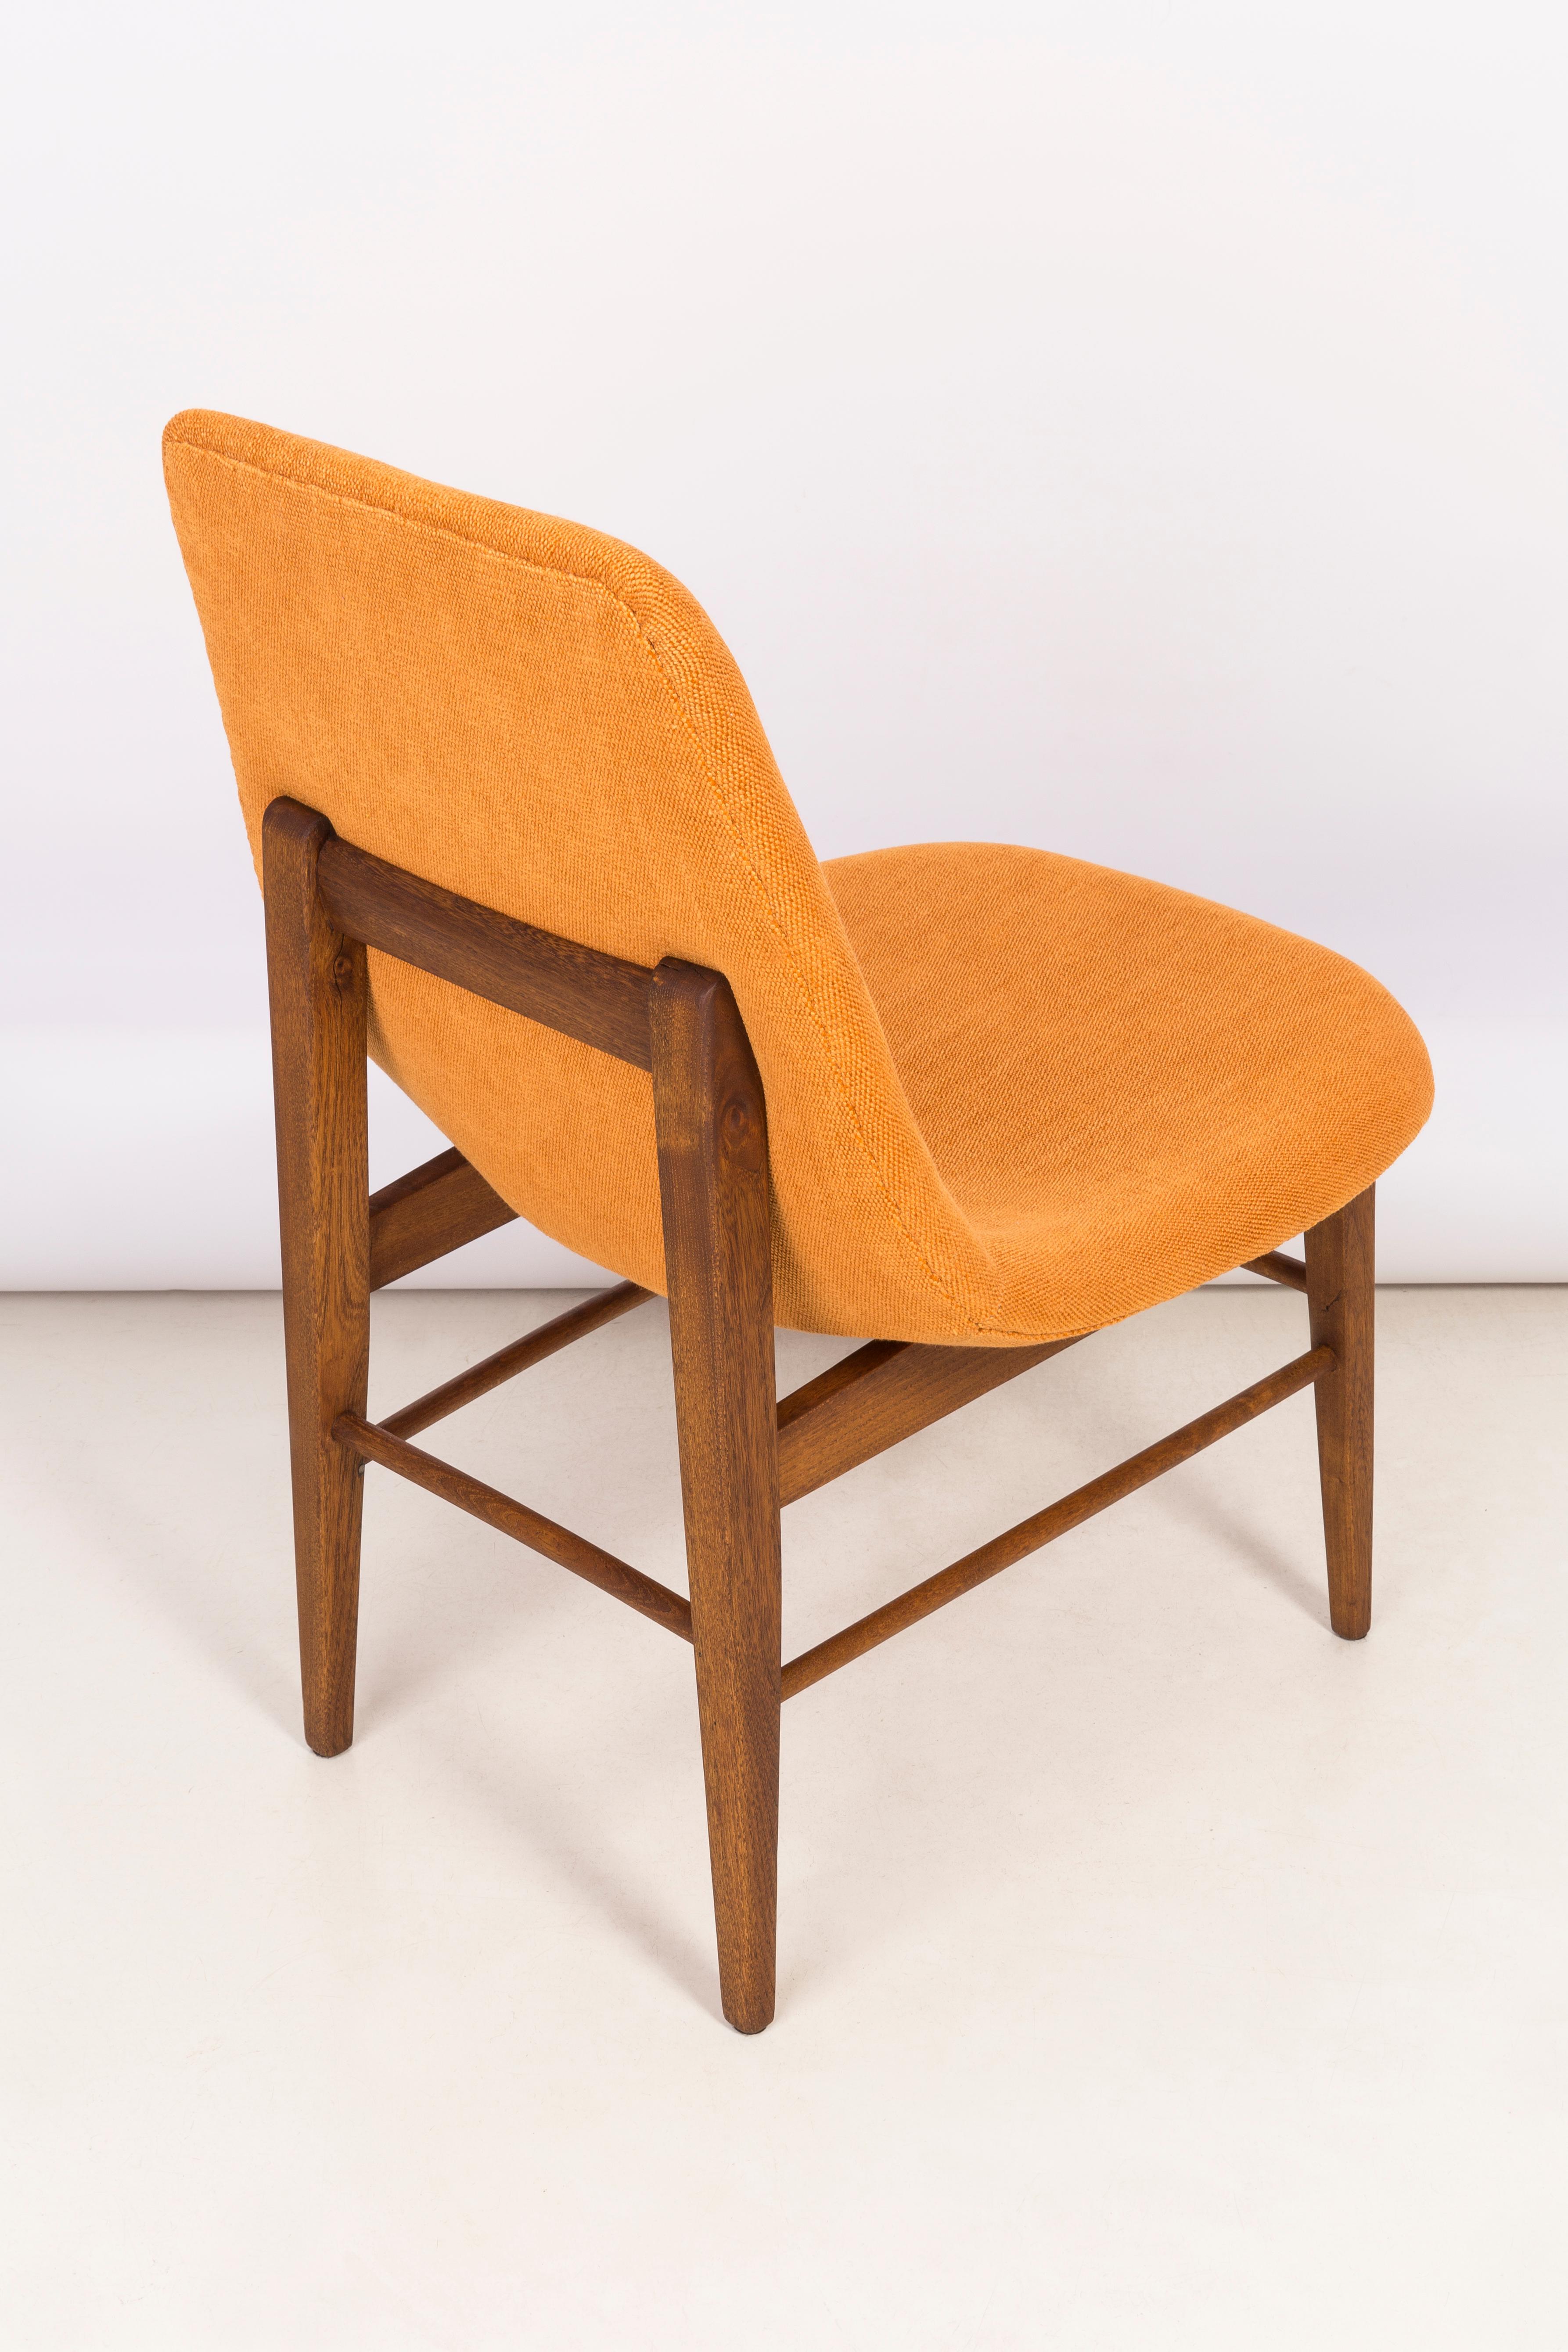 Set of Two Rare 20th Century Orange Shell Chairs, H. Lachert, 1960s In Excellent Condition For Sale In 05-080 Hornowek, PL